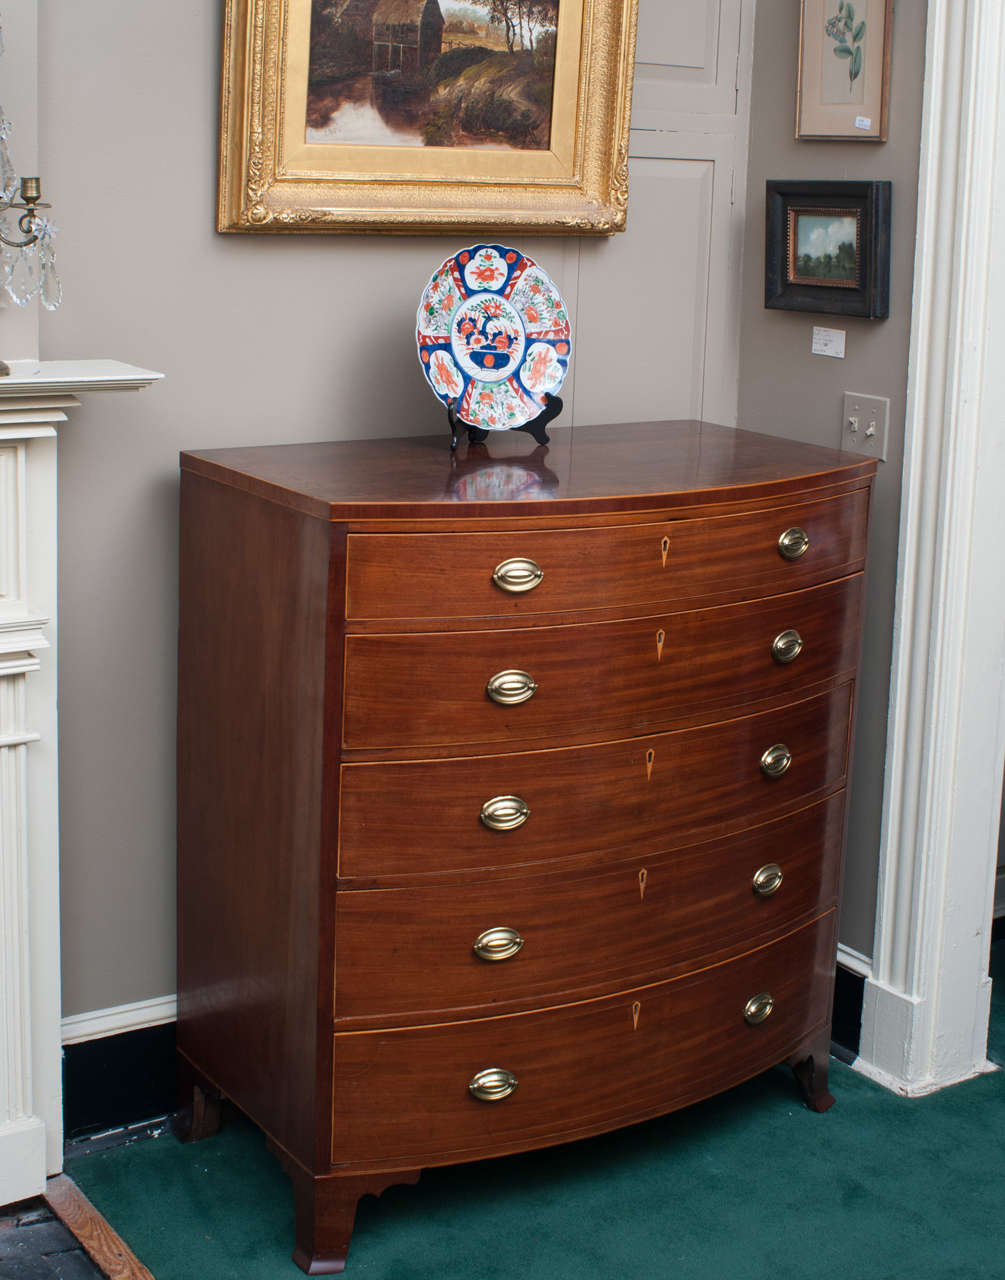 This five-drawer chest was probably made in the Mid-Atlantic (Maryland or Virginia) - hand-cast brass pulls - excellent French bracket feet - excellent patina, light mellow color - very subtle string inlay on the drawers (see final photo,